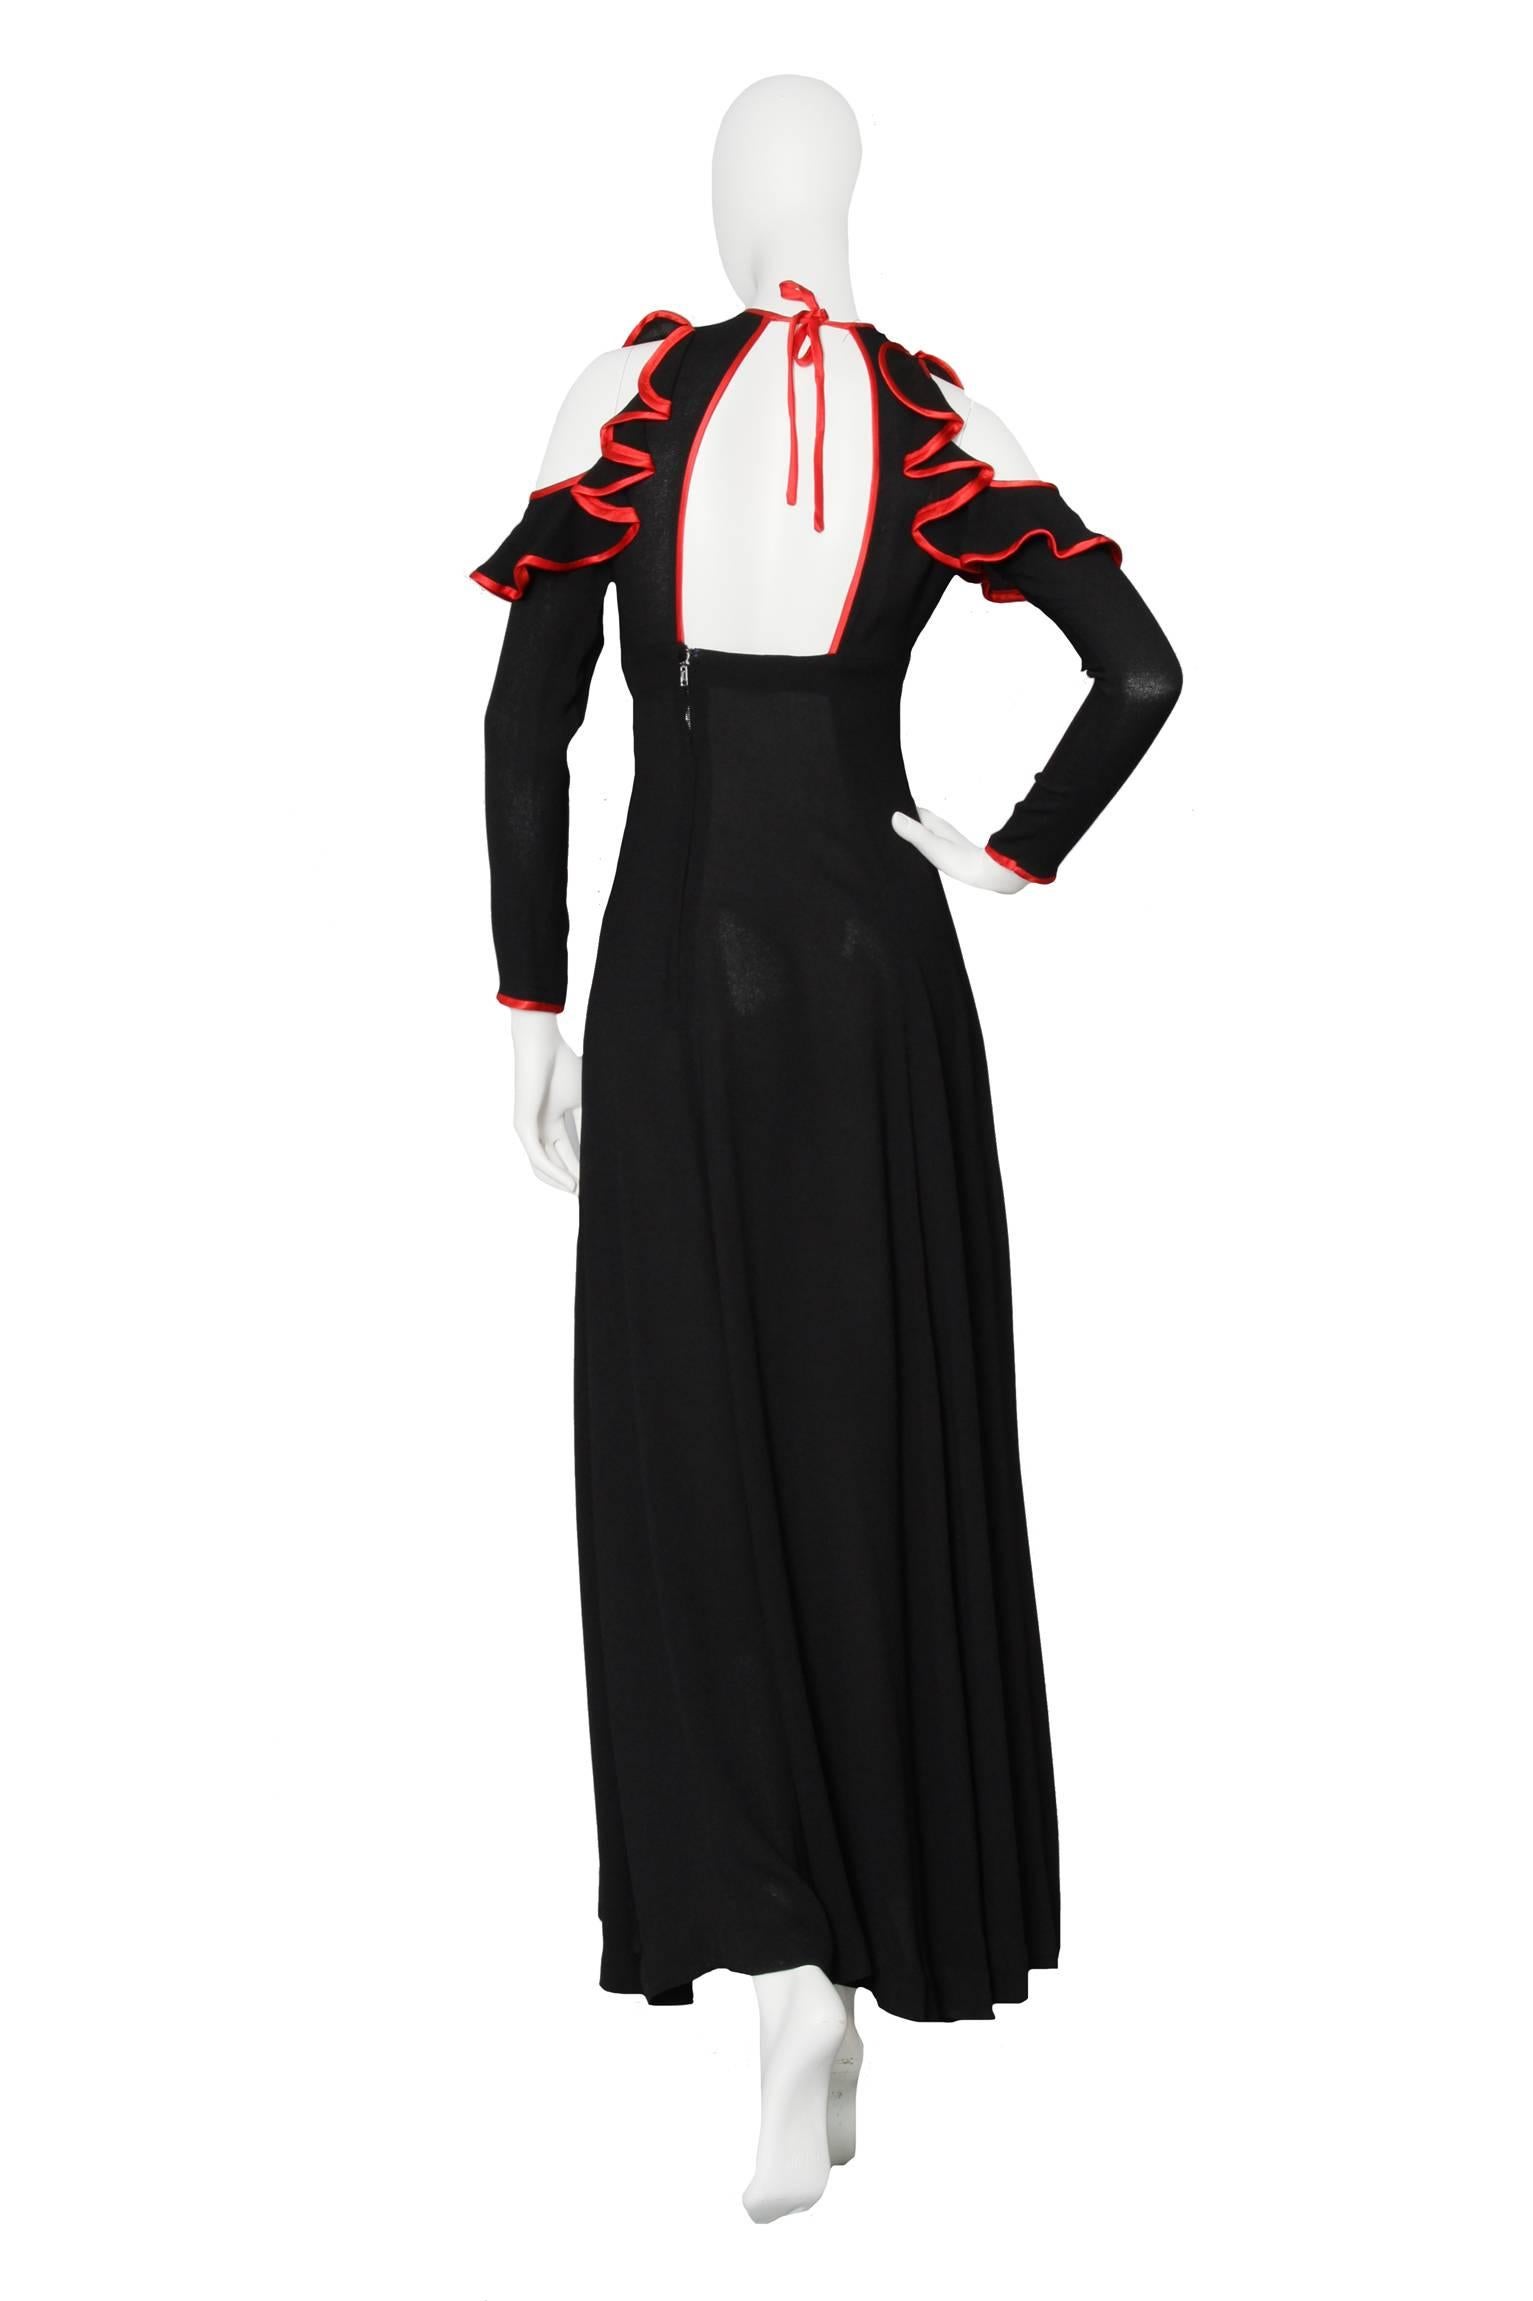 An absolutely stunning 1970s black Ossie Clark ankle-length moss crepe dress with long tapered sleeves and cut-out shoulders. The dress has a fitted waistline and a key-hole cut-out in the front, with contrasting red piping. The red silk is repeated